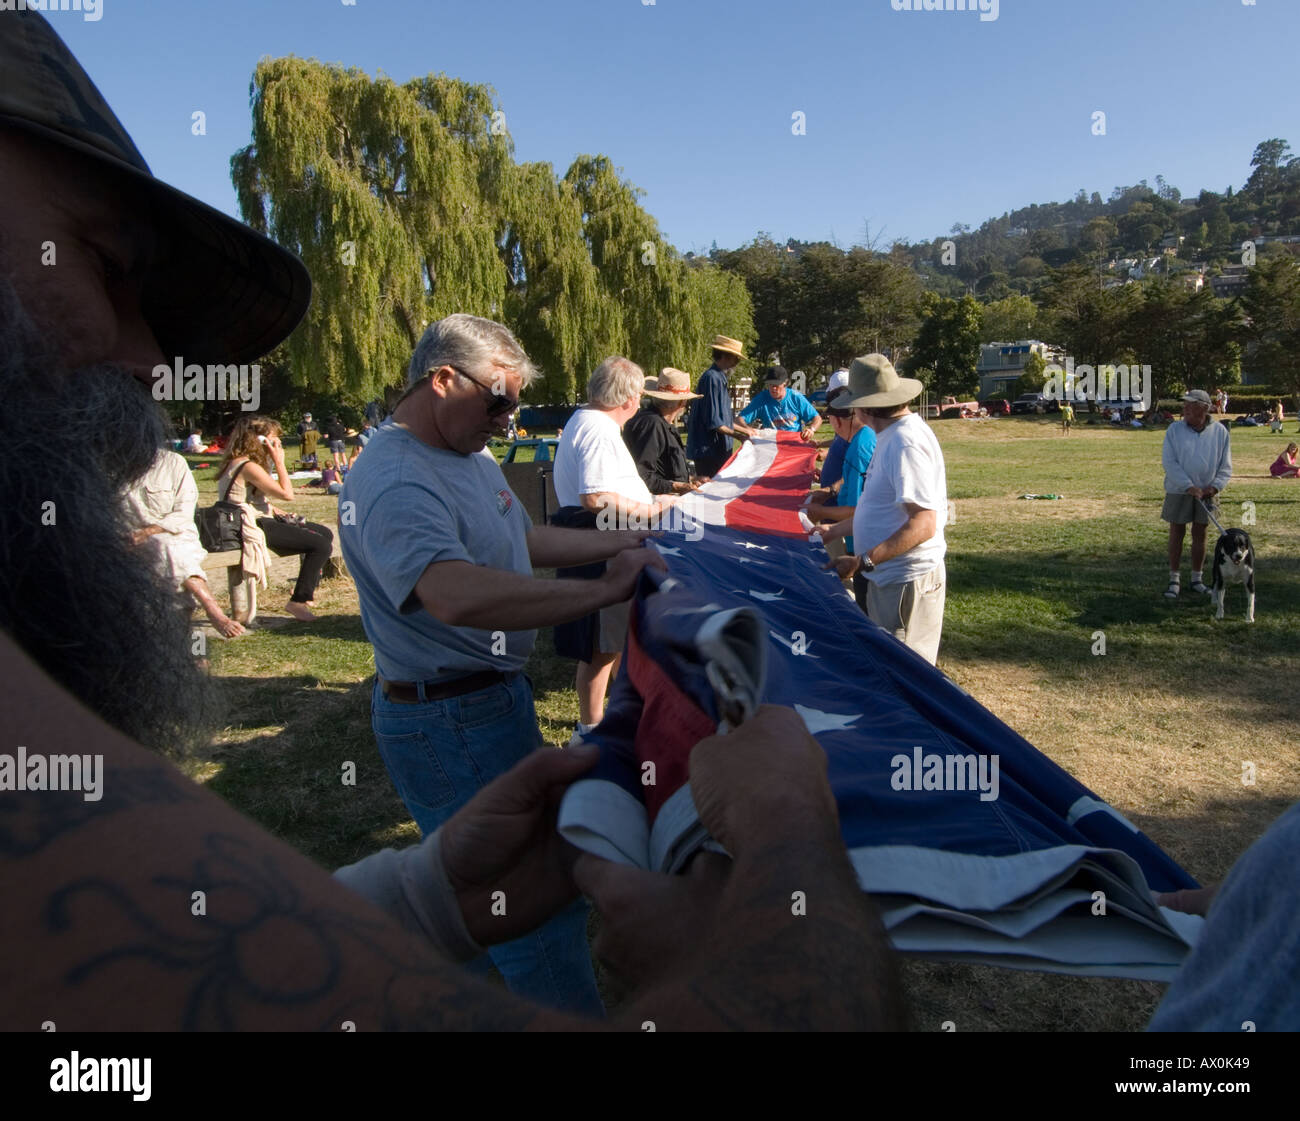 People folding the flag in the traditional manner on the 4th of July holiday in Sausalito,California,USA Stock Photo